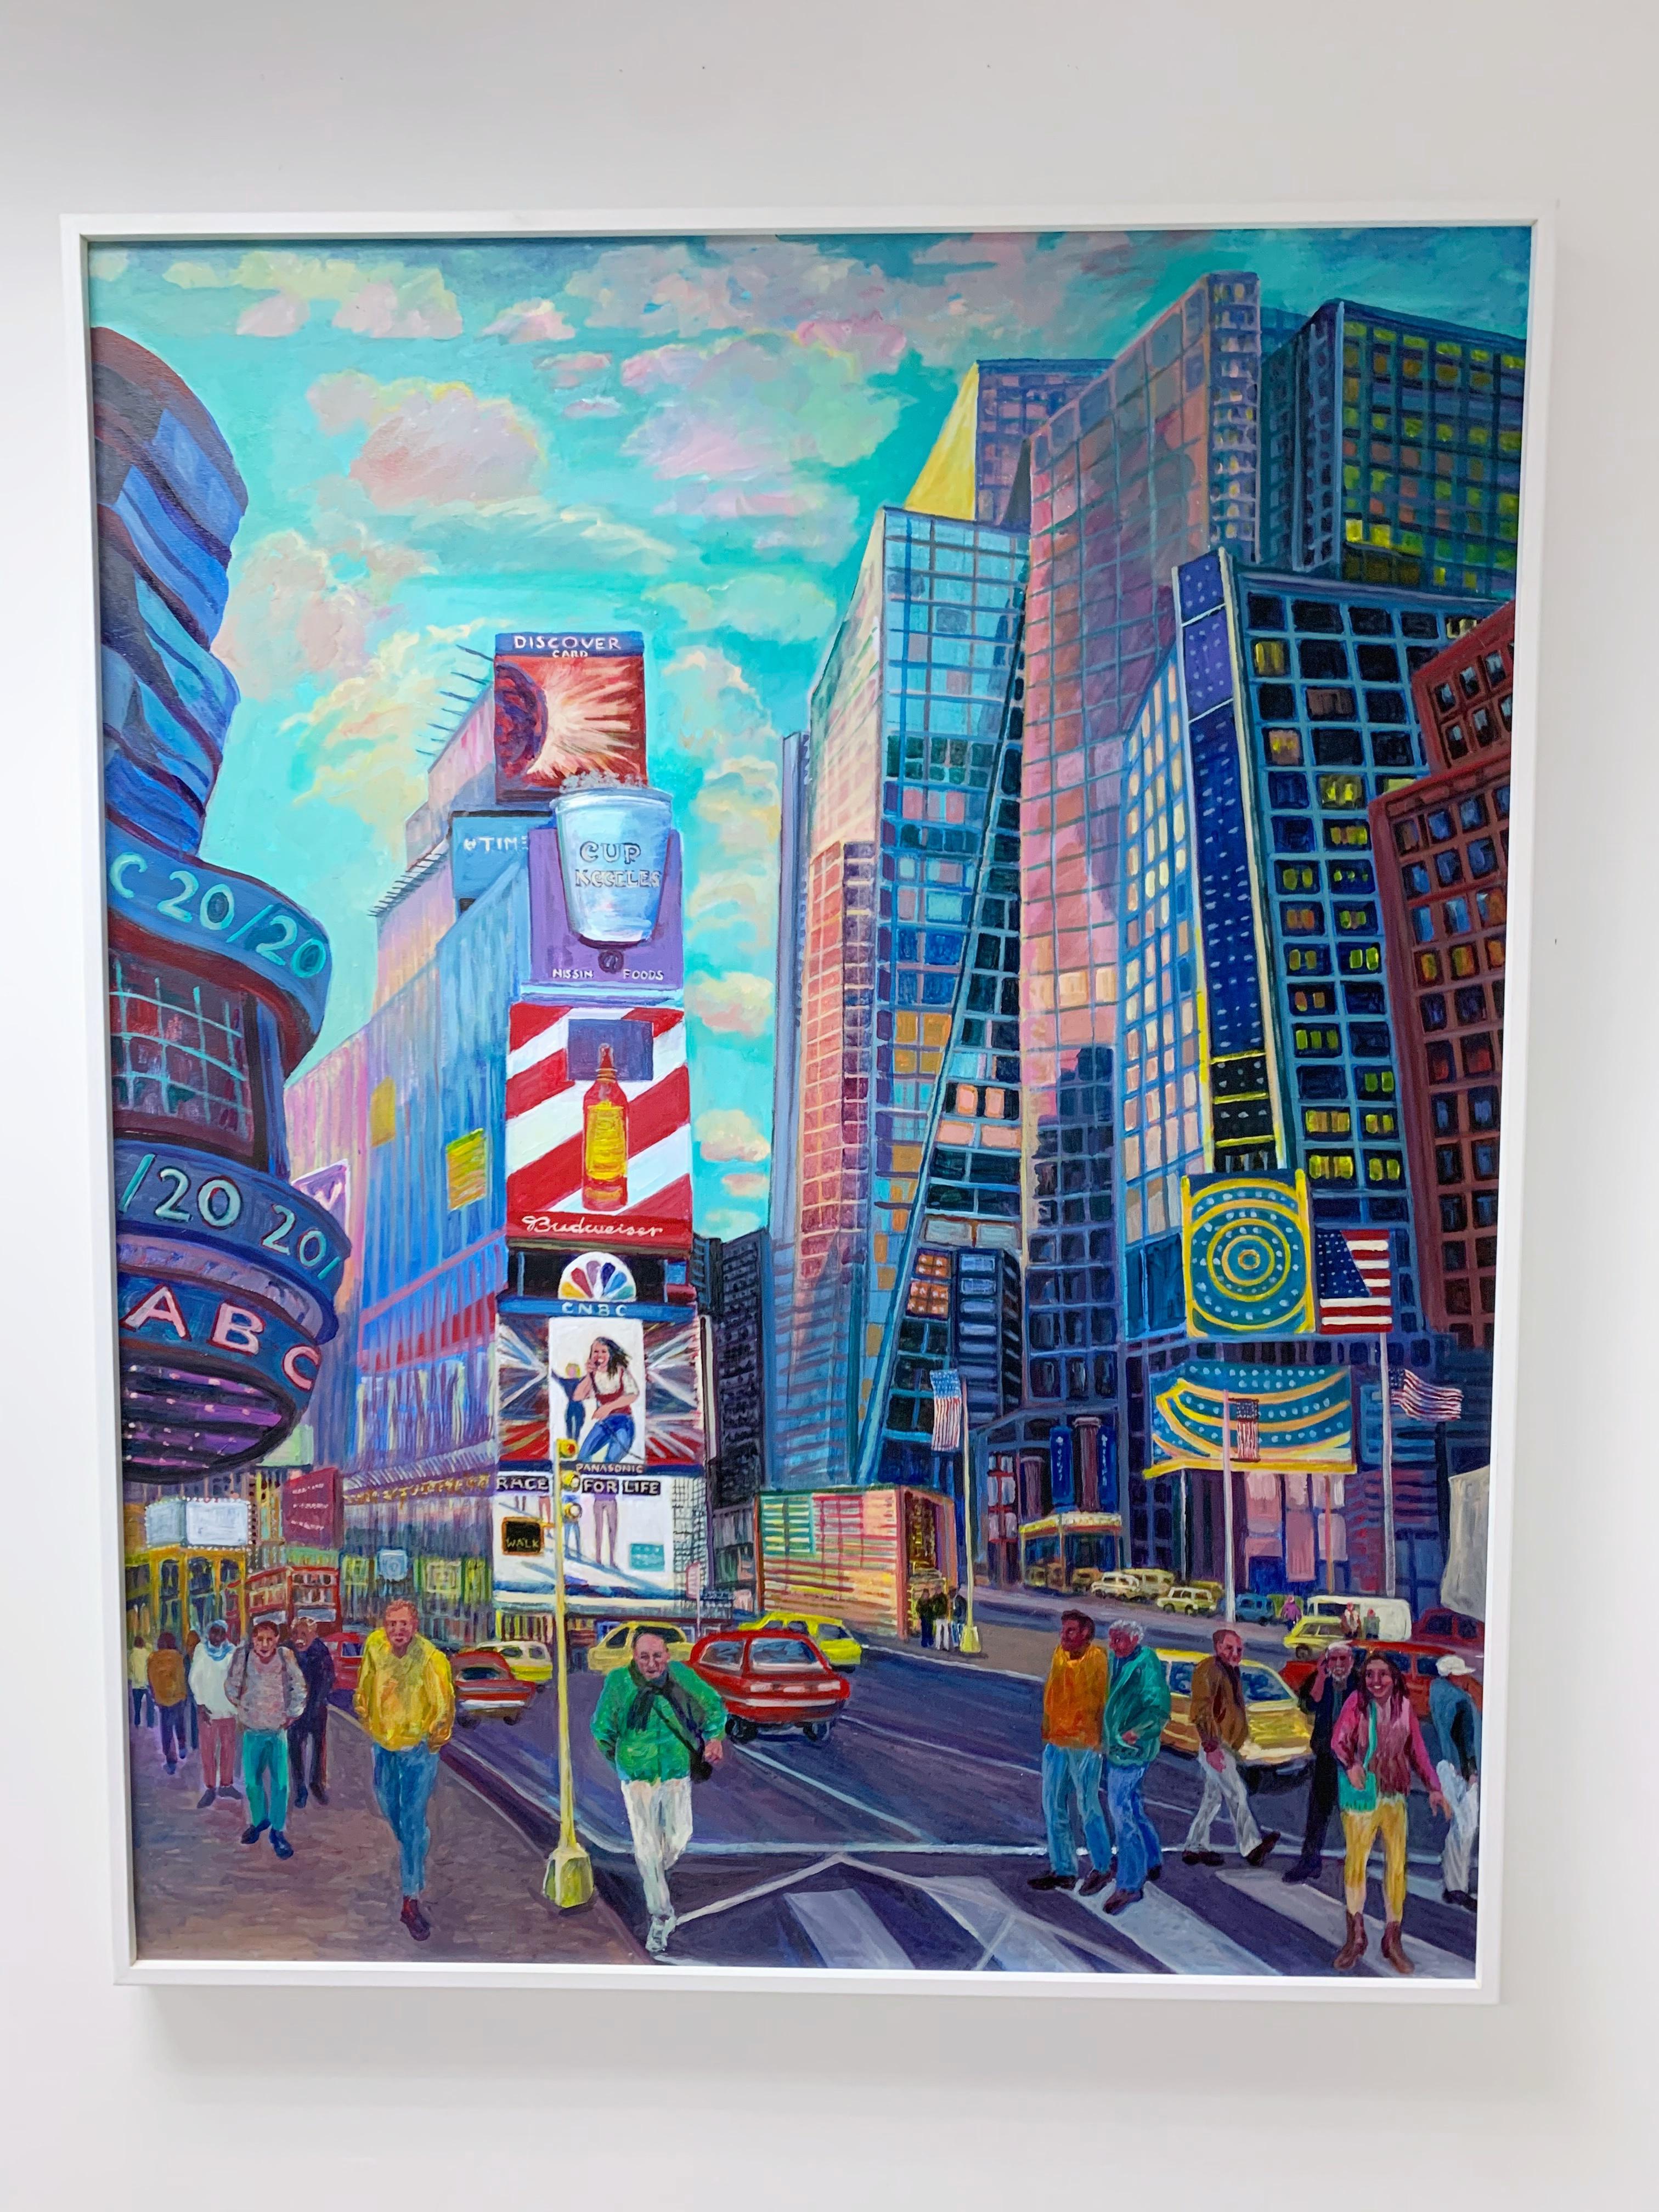 Thelma Appel
Times Square V, 2015
Oil on canvas
Signed, dated and titled by the artist on the back
Frame Included: held in the original artist's frame
Measurements:
Frame:
60.5 x 48.5 x 2.5 inches
Artwork:
60 x 48 inches
Part of Thelma Appel's Times